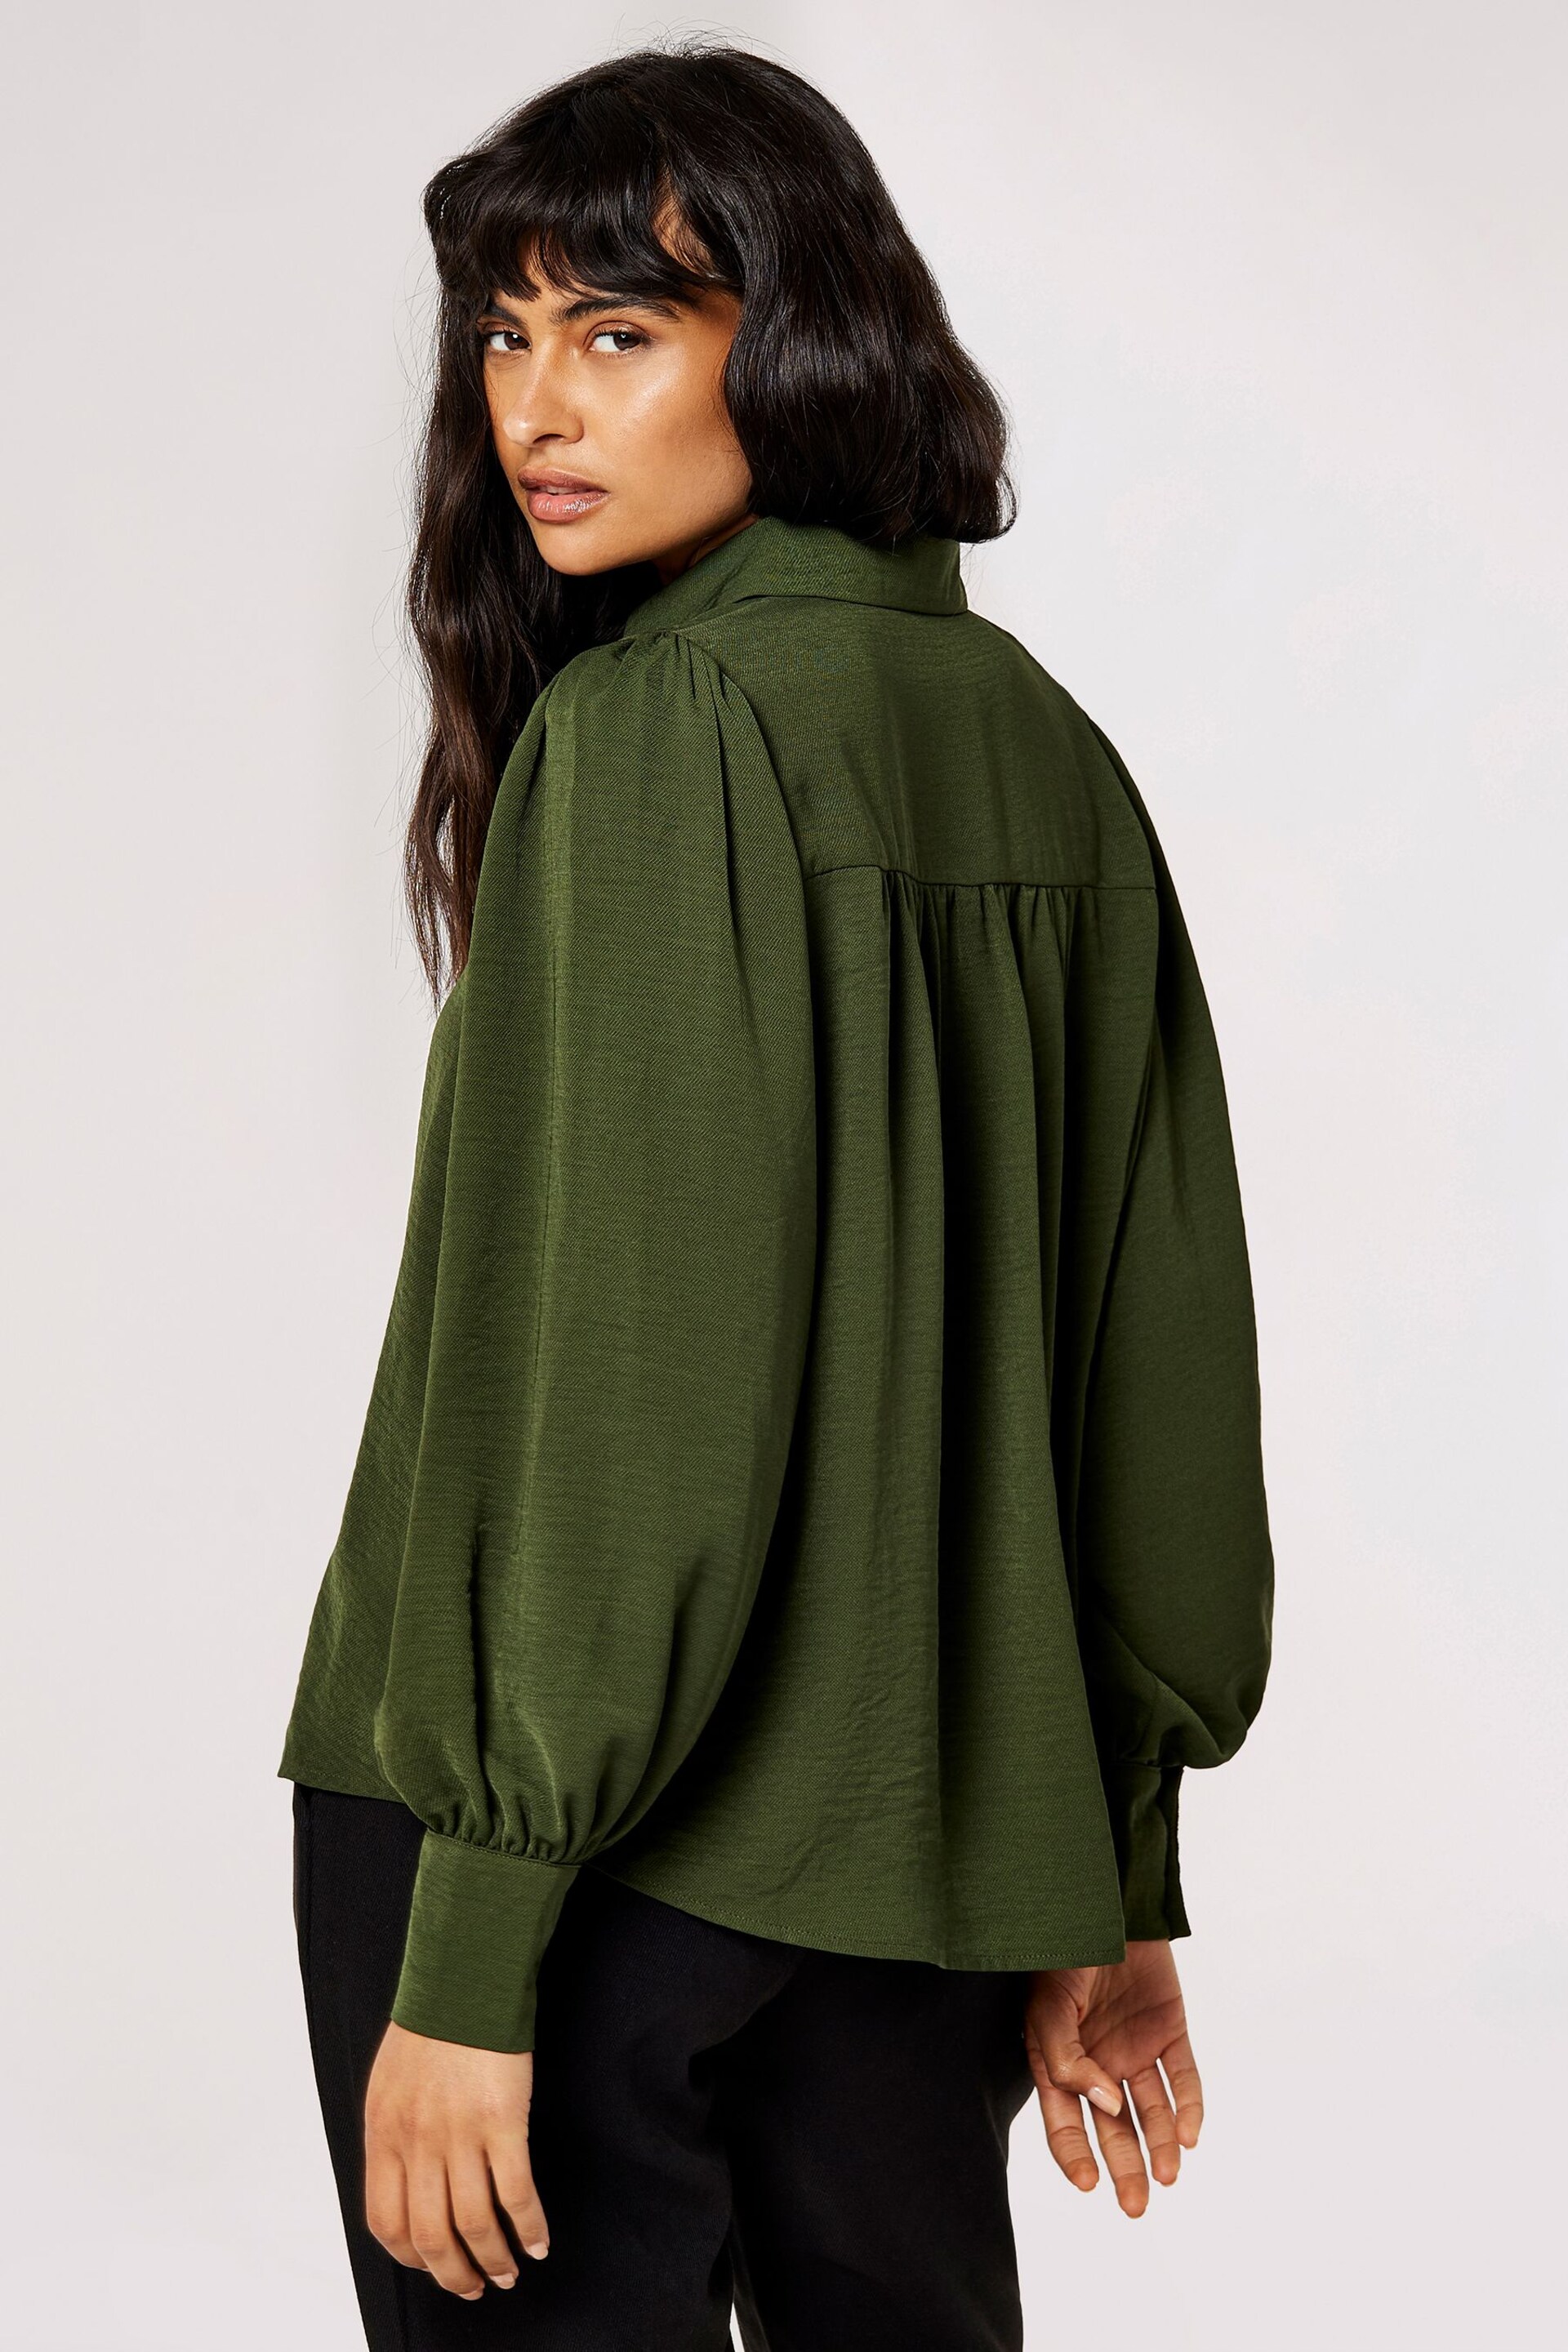 Apricot Green Airflow Volume Sleeve Shirt - Image 2 of 5